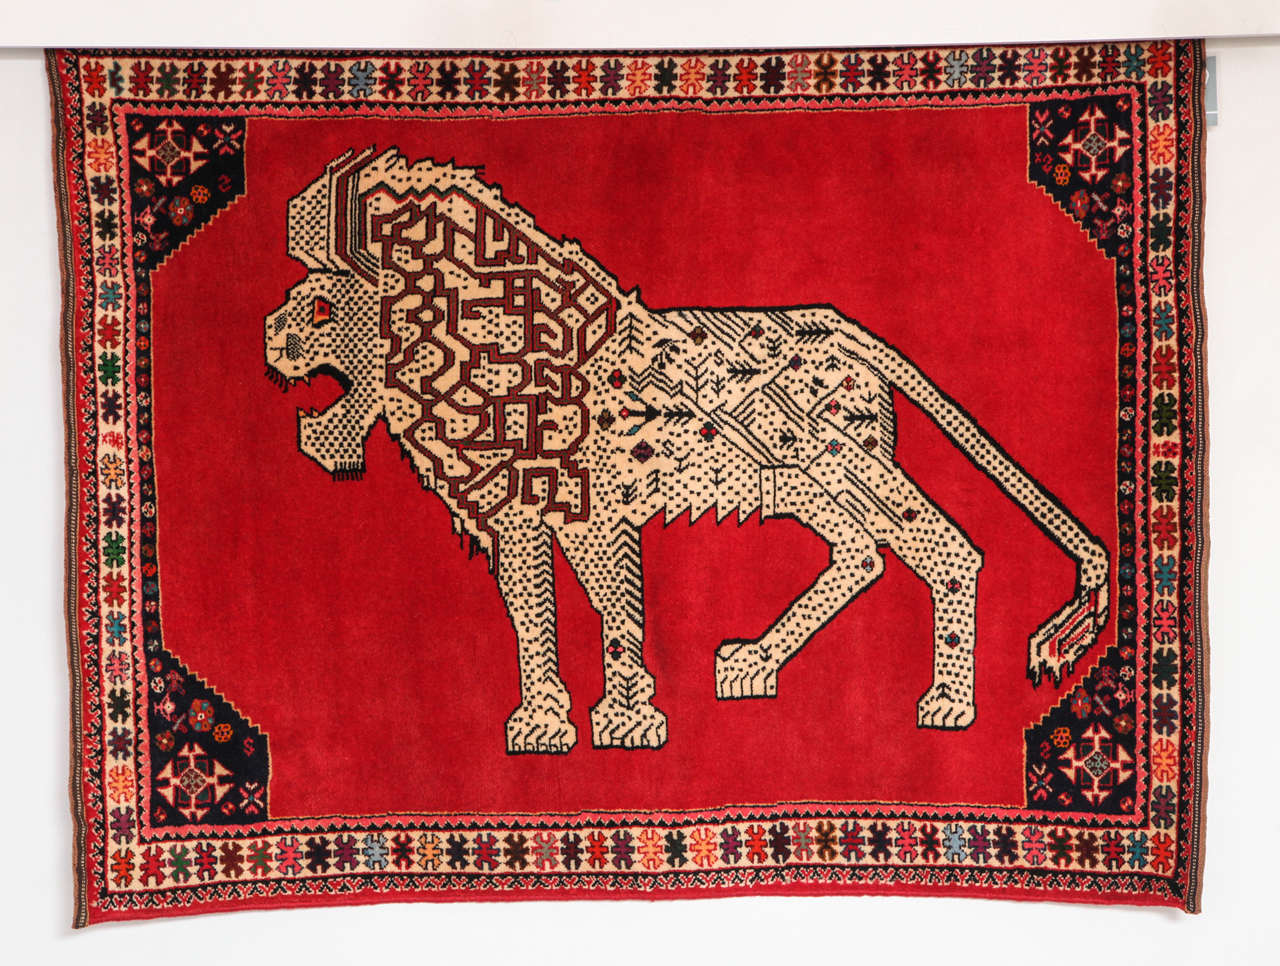 This Persian Qashqai carpet created, circa 1940 consists of a handspun wool warp, weft and hand-knotted pile and natural vegetable dyes. Its highly detailed central lion design is balanced by the carpet's strong red field and colorful geometric